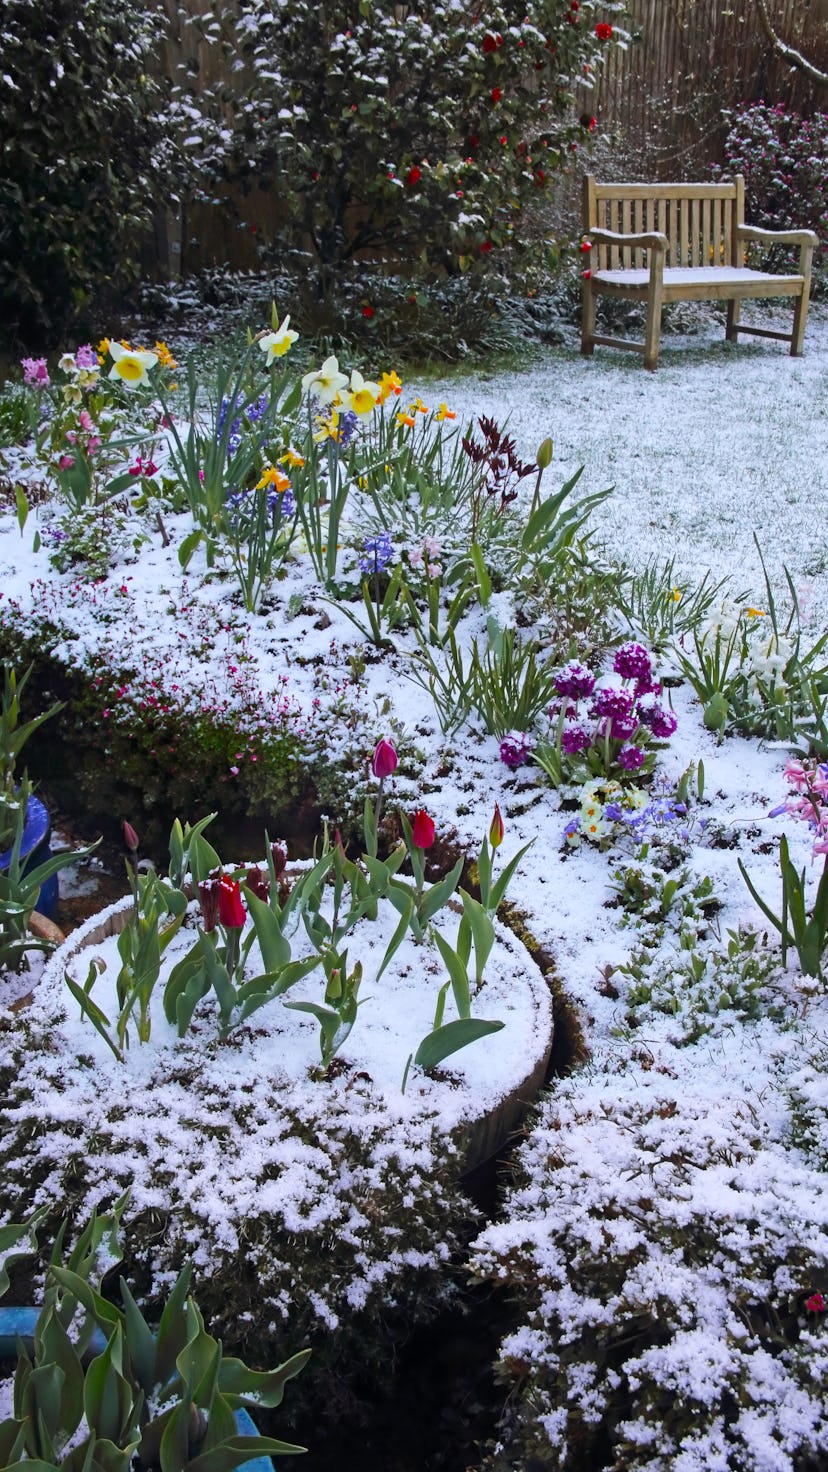 A patch of colorful flowers covered in snow with a bench in the background, demonstrating winter gar...